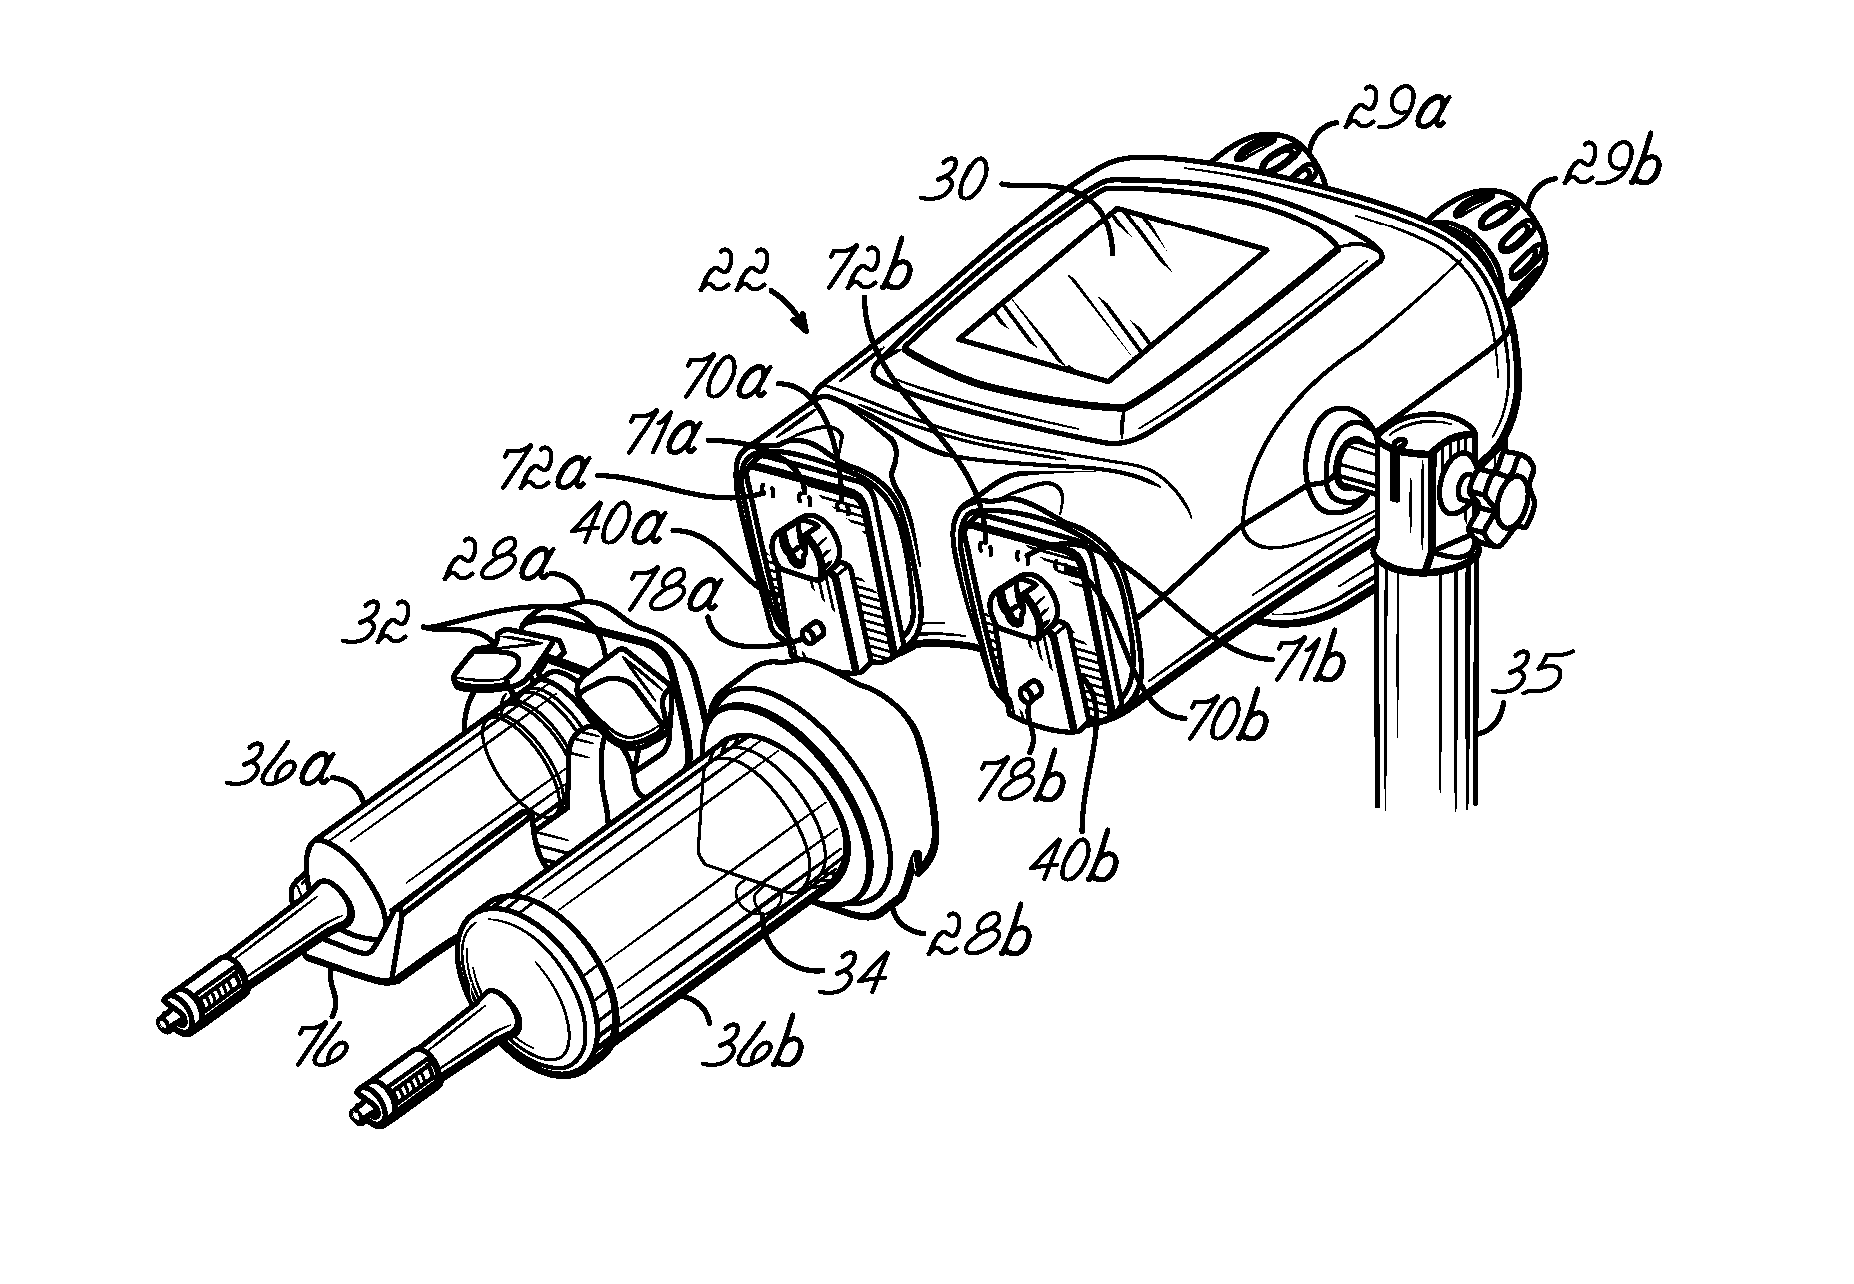 Powerhead of a Power Injection System